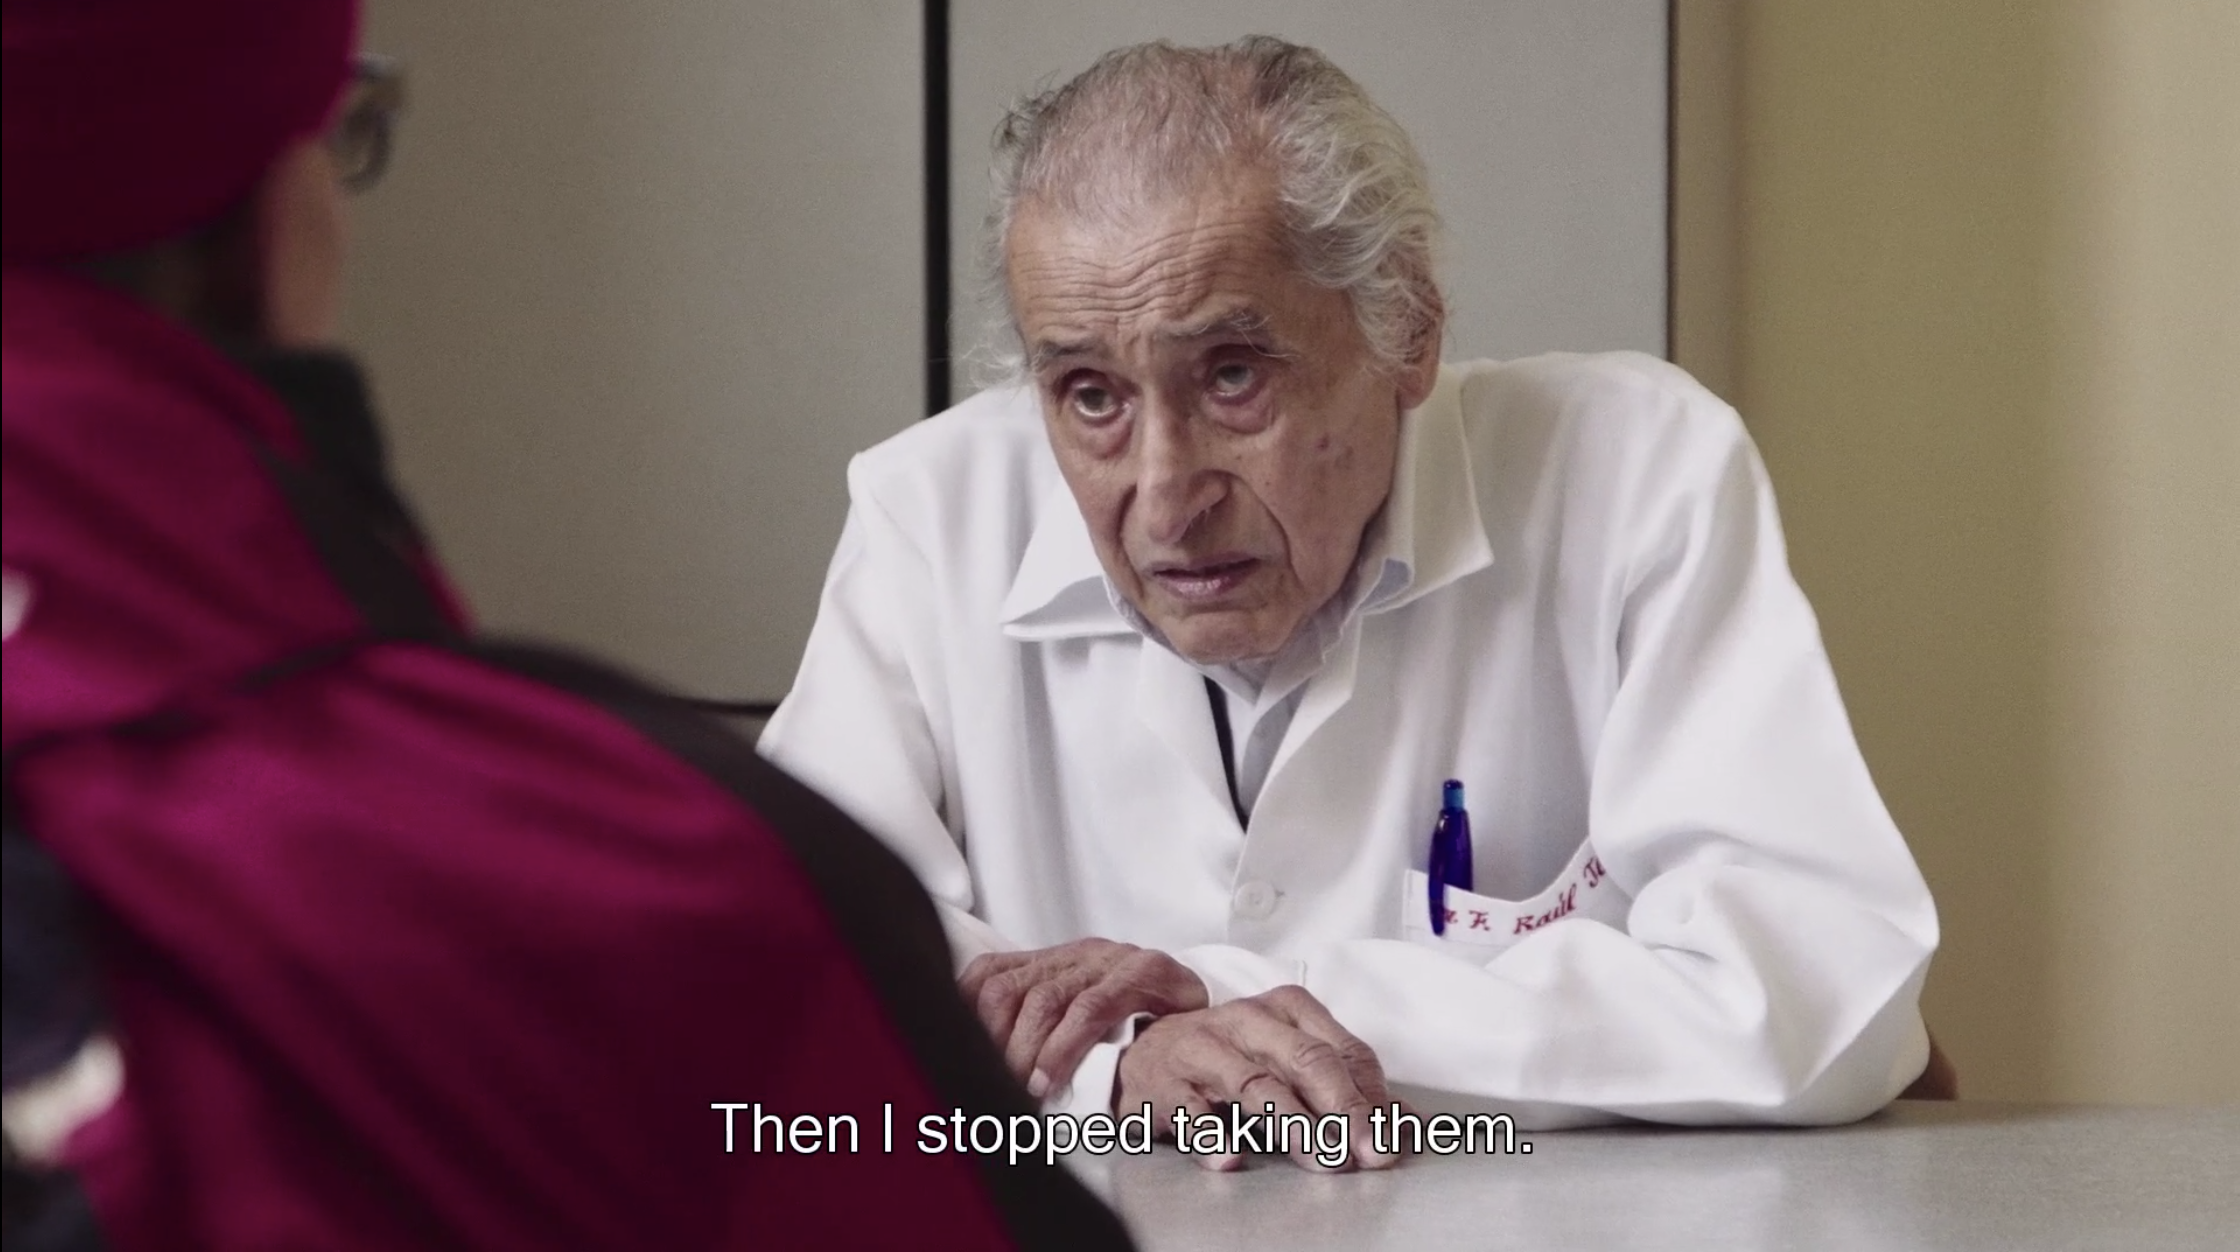 Peruvian doctor in "100UP"